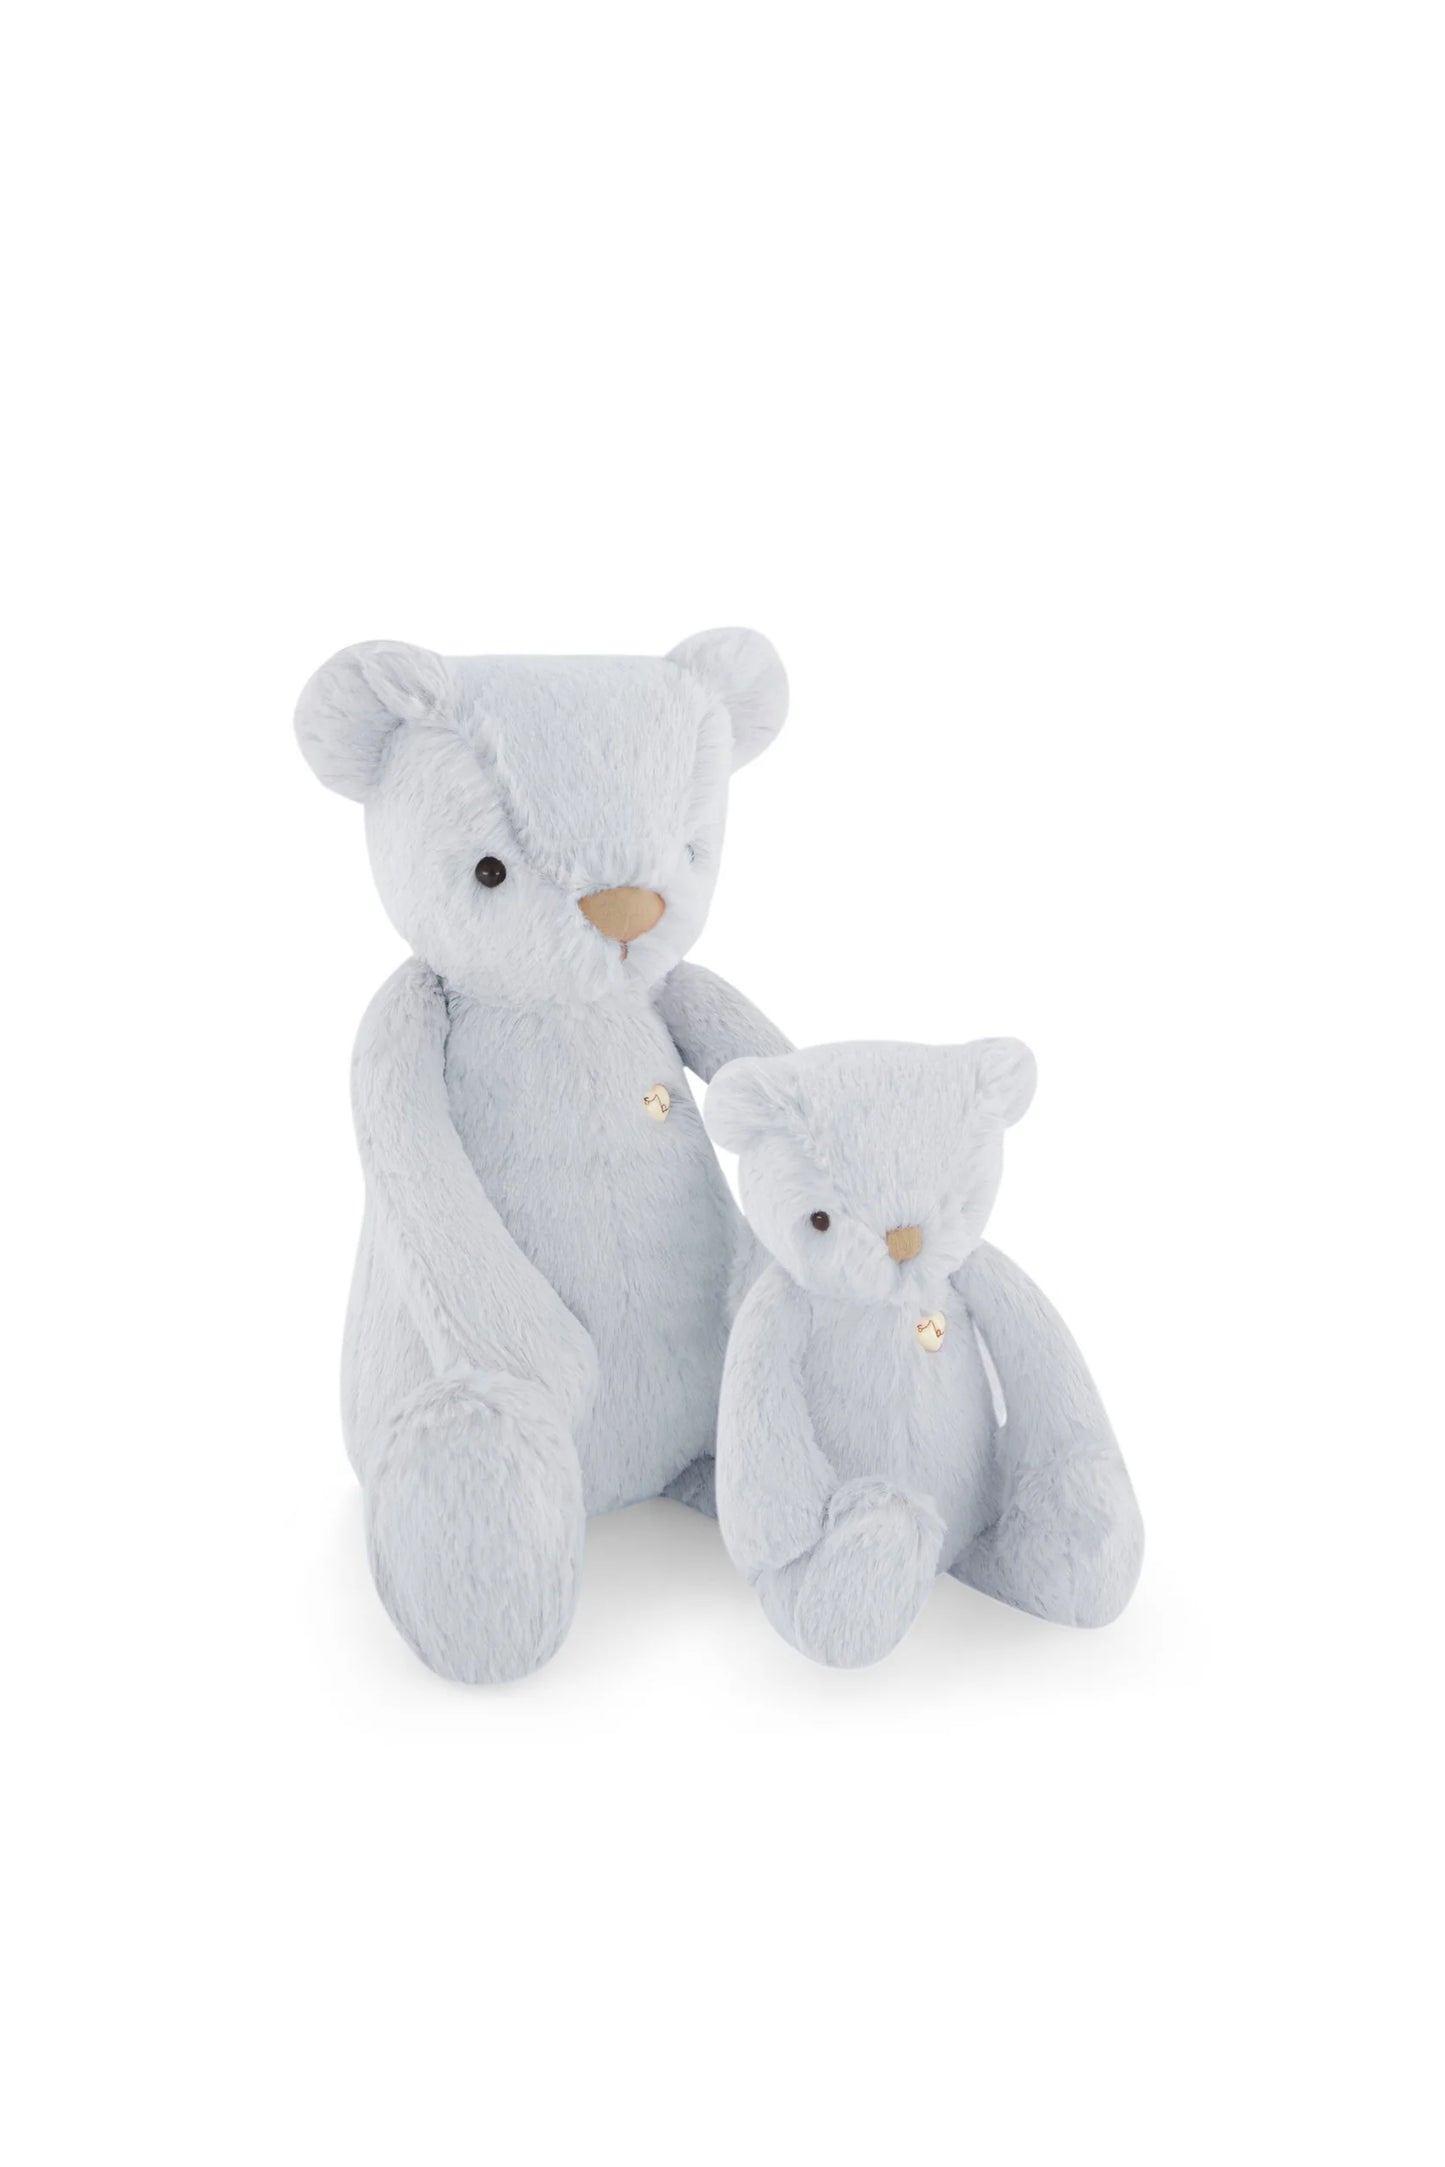 Jamie Kay Snuggle Bunnies  - George the Bear (Droplet - Size Options Available)